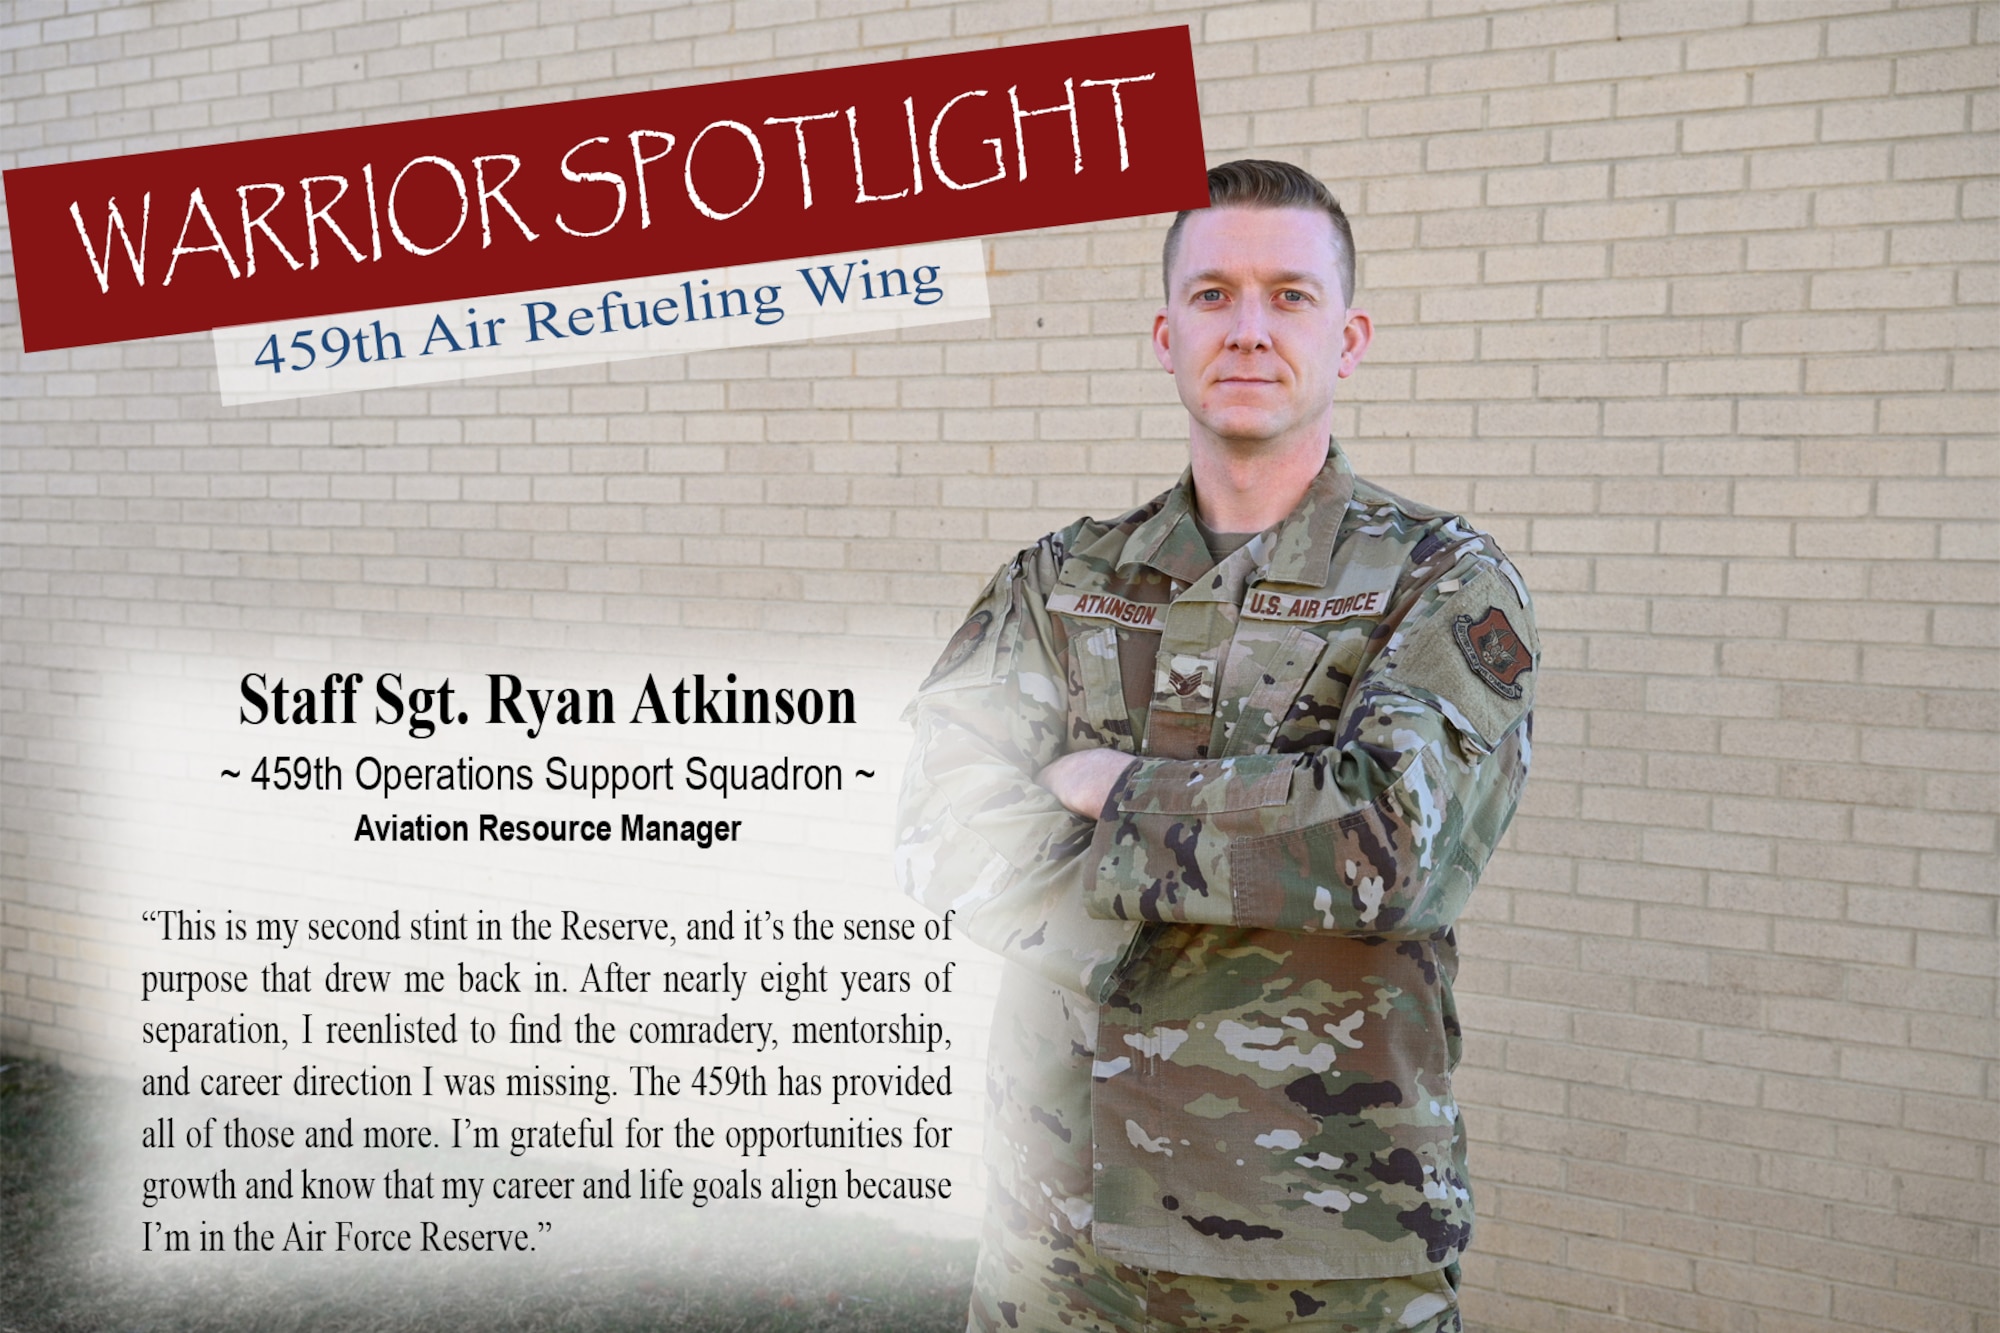 Staff Sgt. Ryan Atkinson, Aviation Resource Manager for the 459th Operations Squadron, is the Warrior of the Month for March 2023. Of his Reserve service, he says, "This is my second stint in the Reserve, and it's the sense of purpose that
drew me back in. After nearly eight years of separation, I reenlisted to find the comradery, mentorship and career direction I was missing. The 459th has provided all of those and more. I'm grateful for the opportunities for growth, and know my career and life goals align within, and because, I'm in the Air Force Reserve."